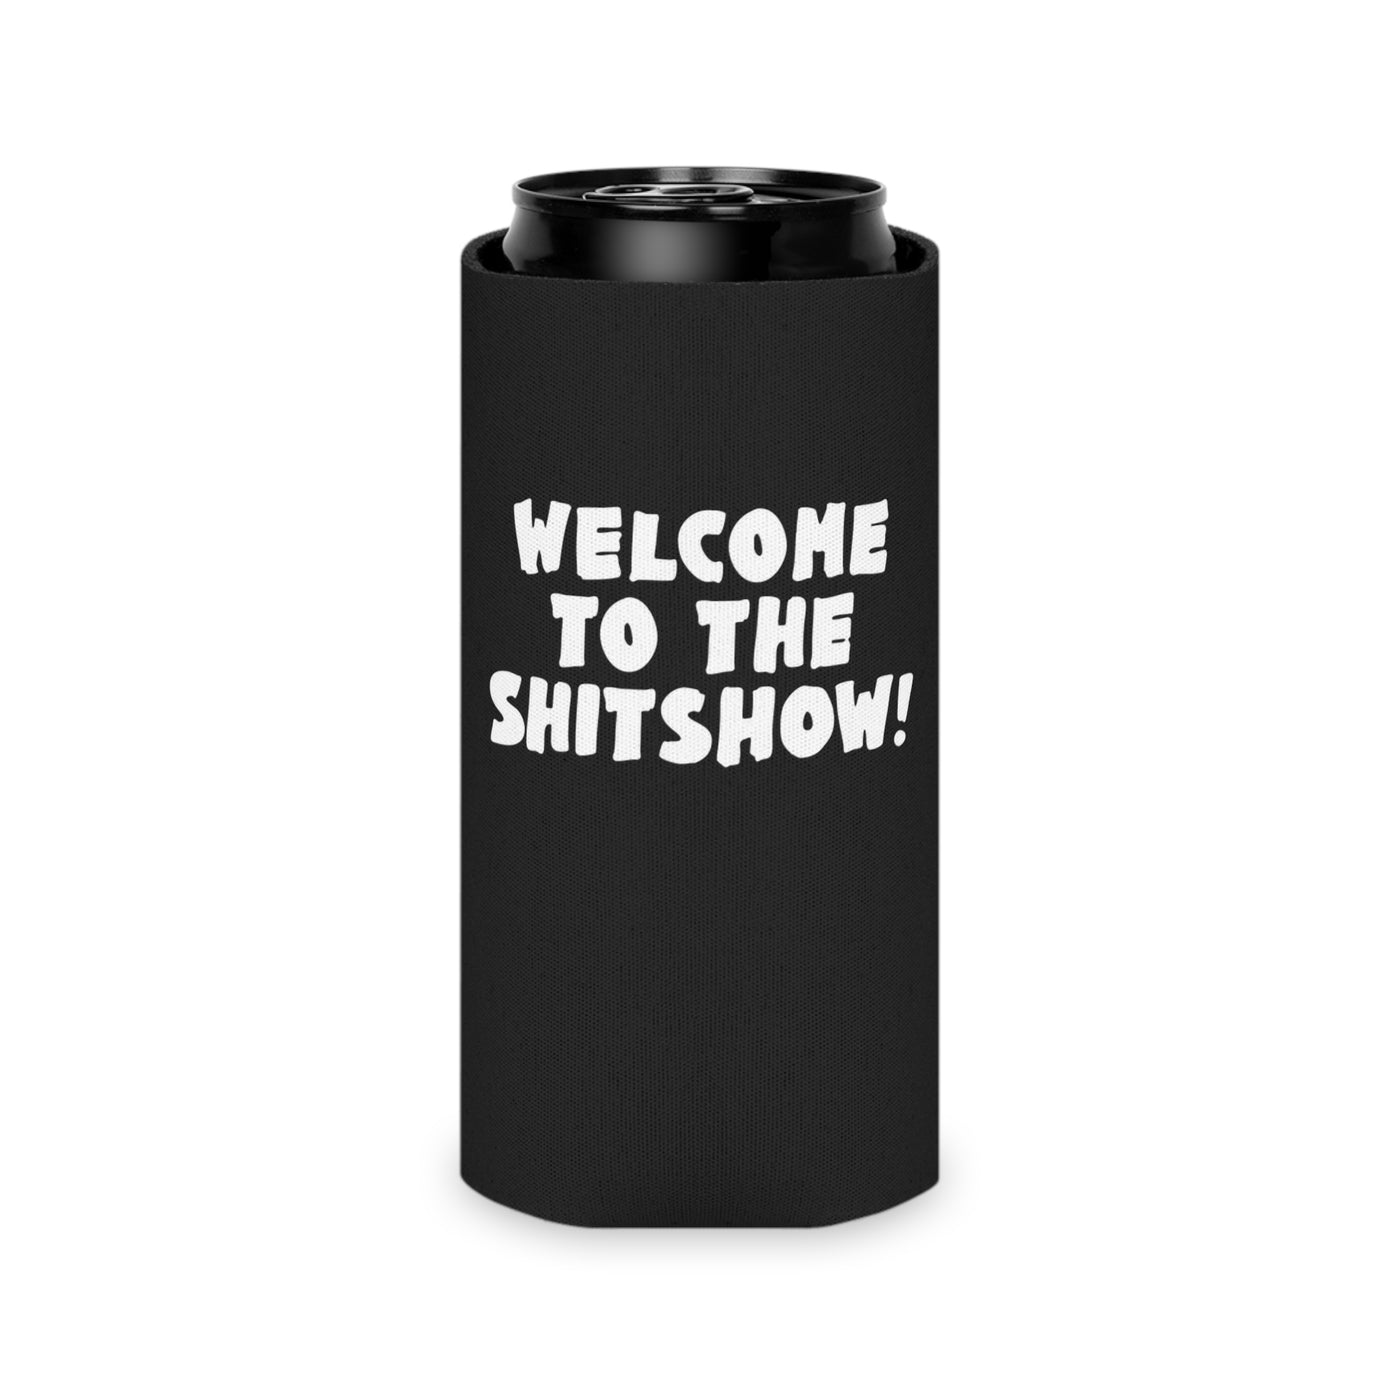 Welcome To The Shitshow!